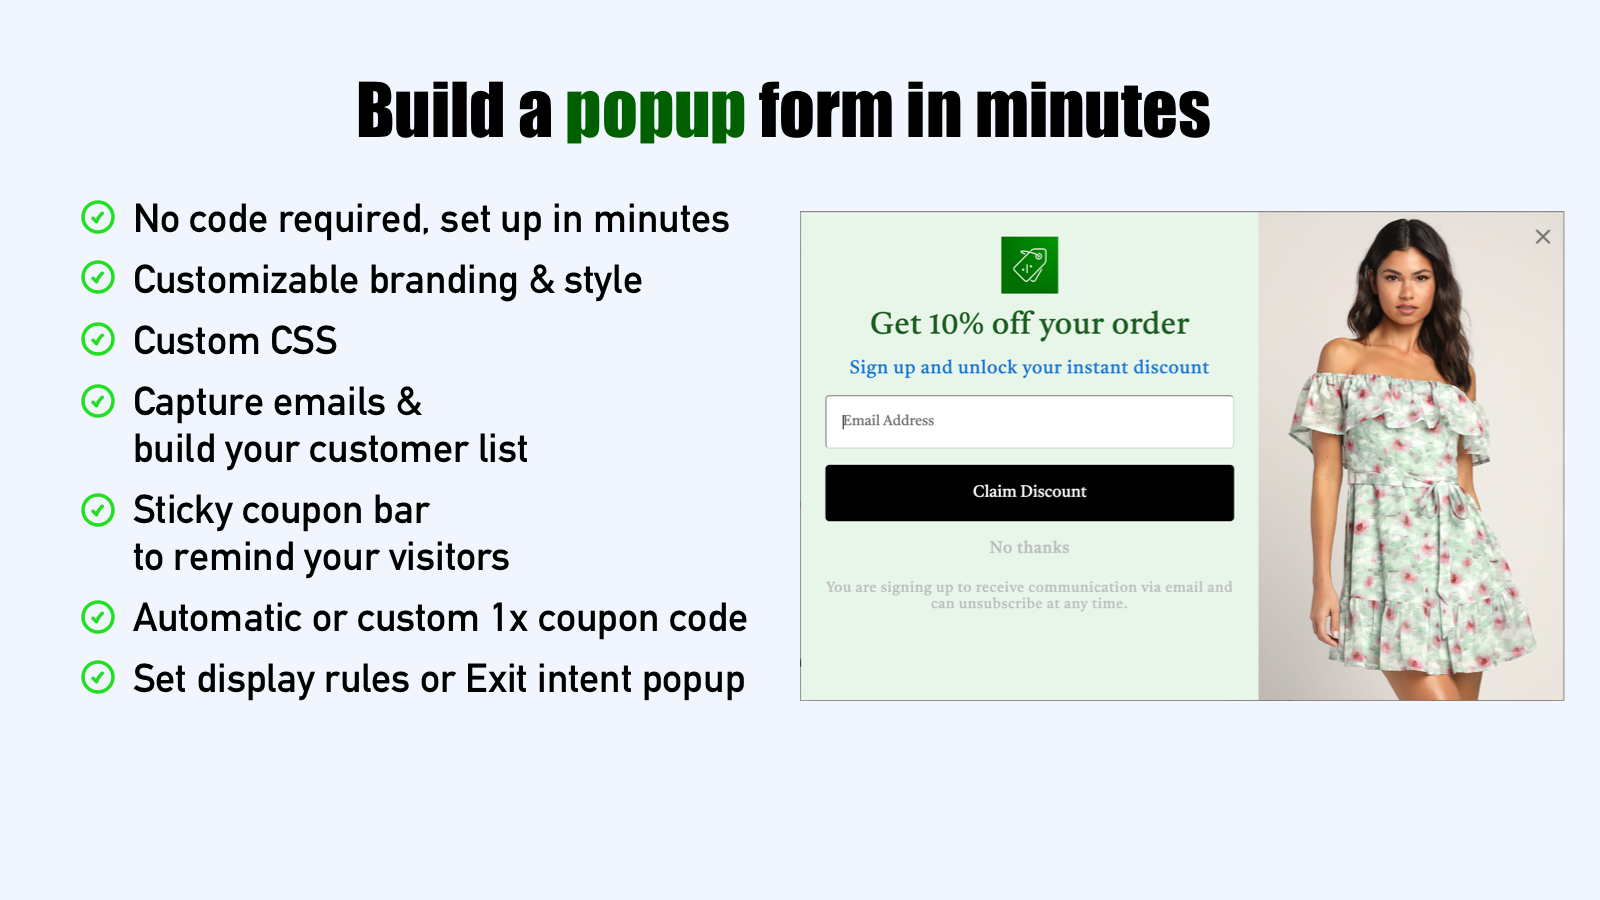 Build a popup form in minutes